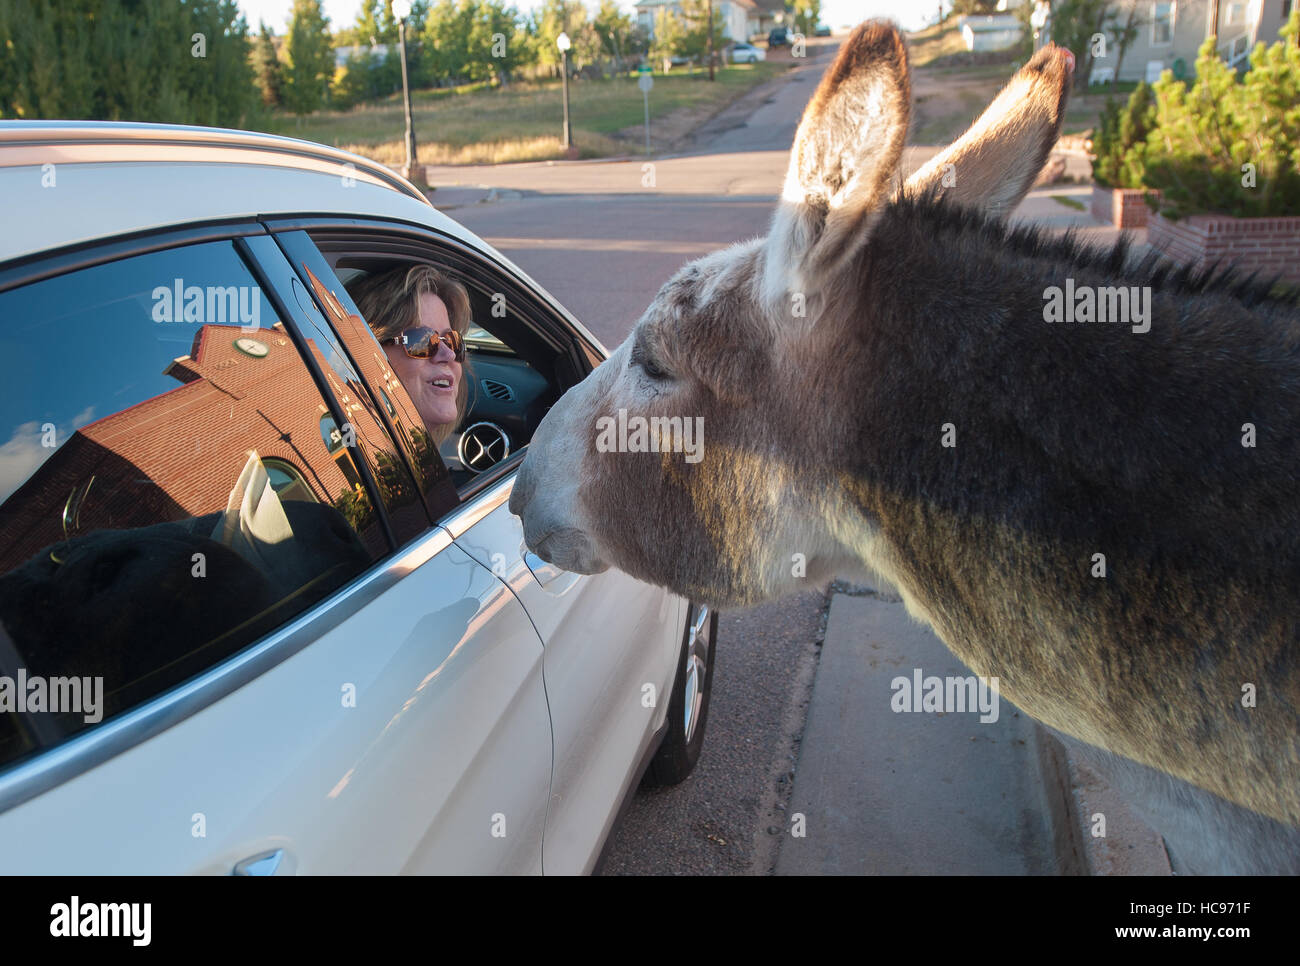 Wild burros in the streets of Cripple Creek, Colorado, USA greet visitors to the area. Stock Photo